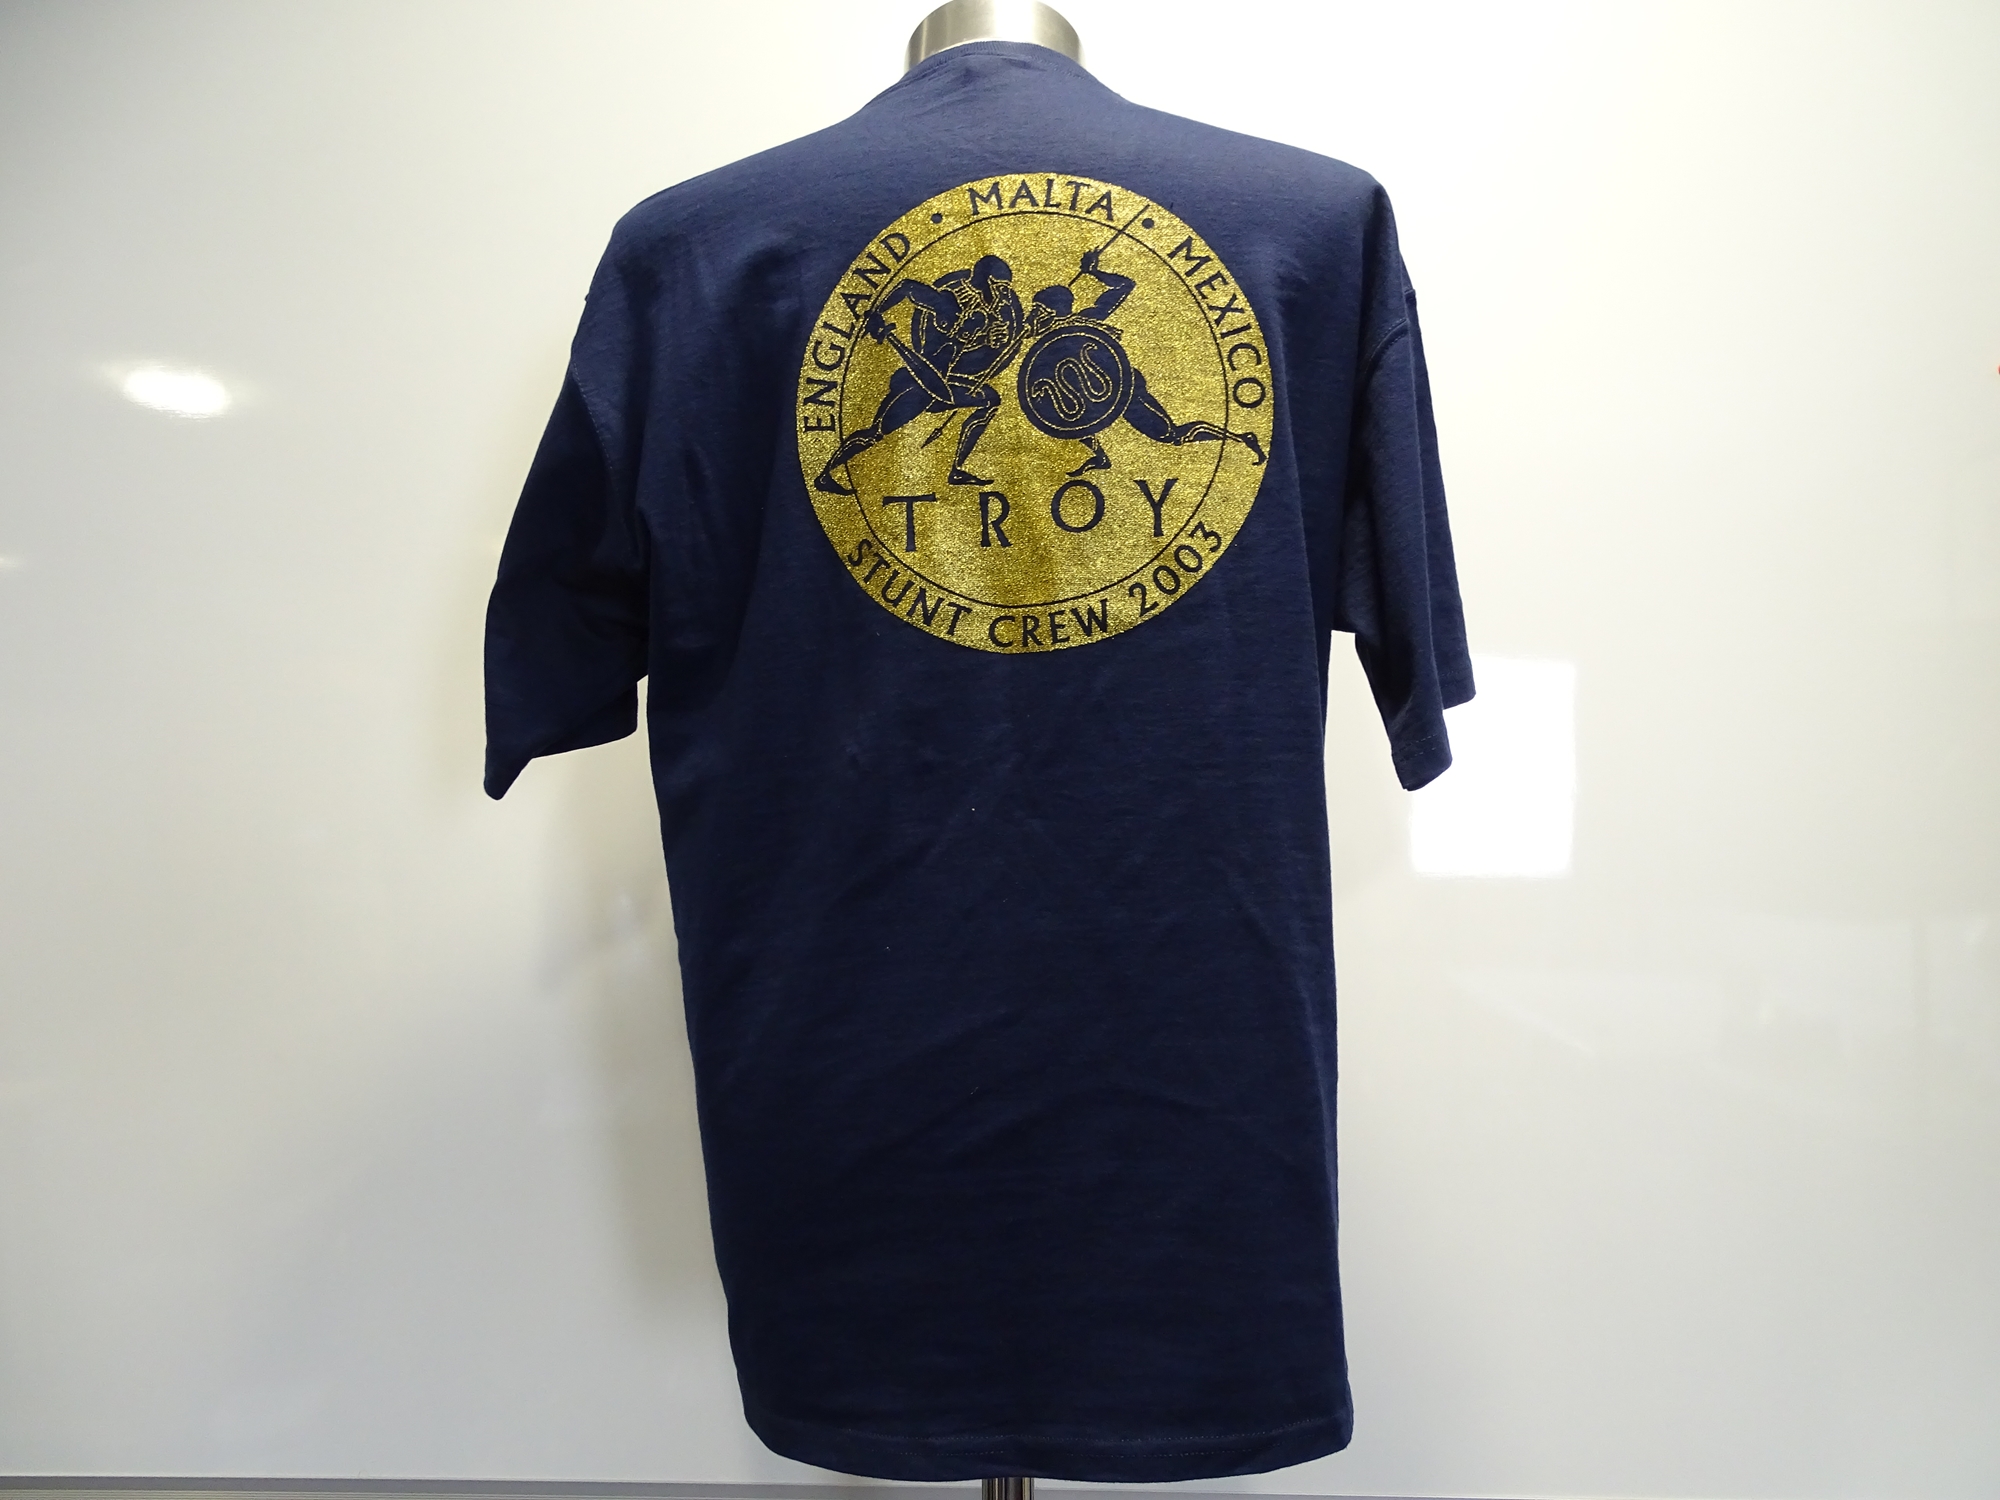 TROY: (2004) (BRAD PITT) Film / Production Crew Issued Clothing: - An XL short sleeved blue stunt - Image 2 of 3